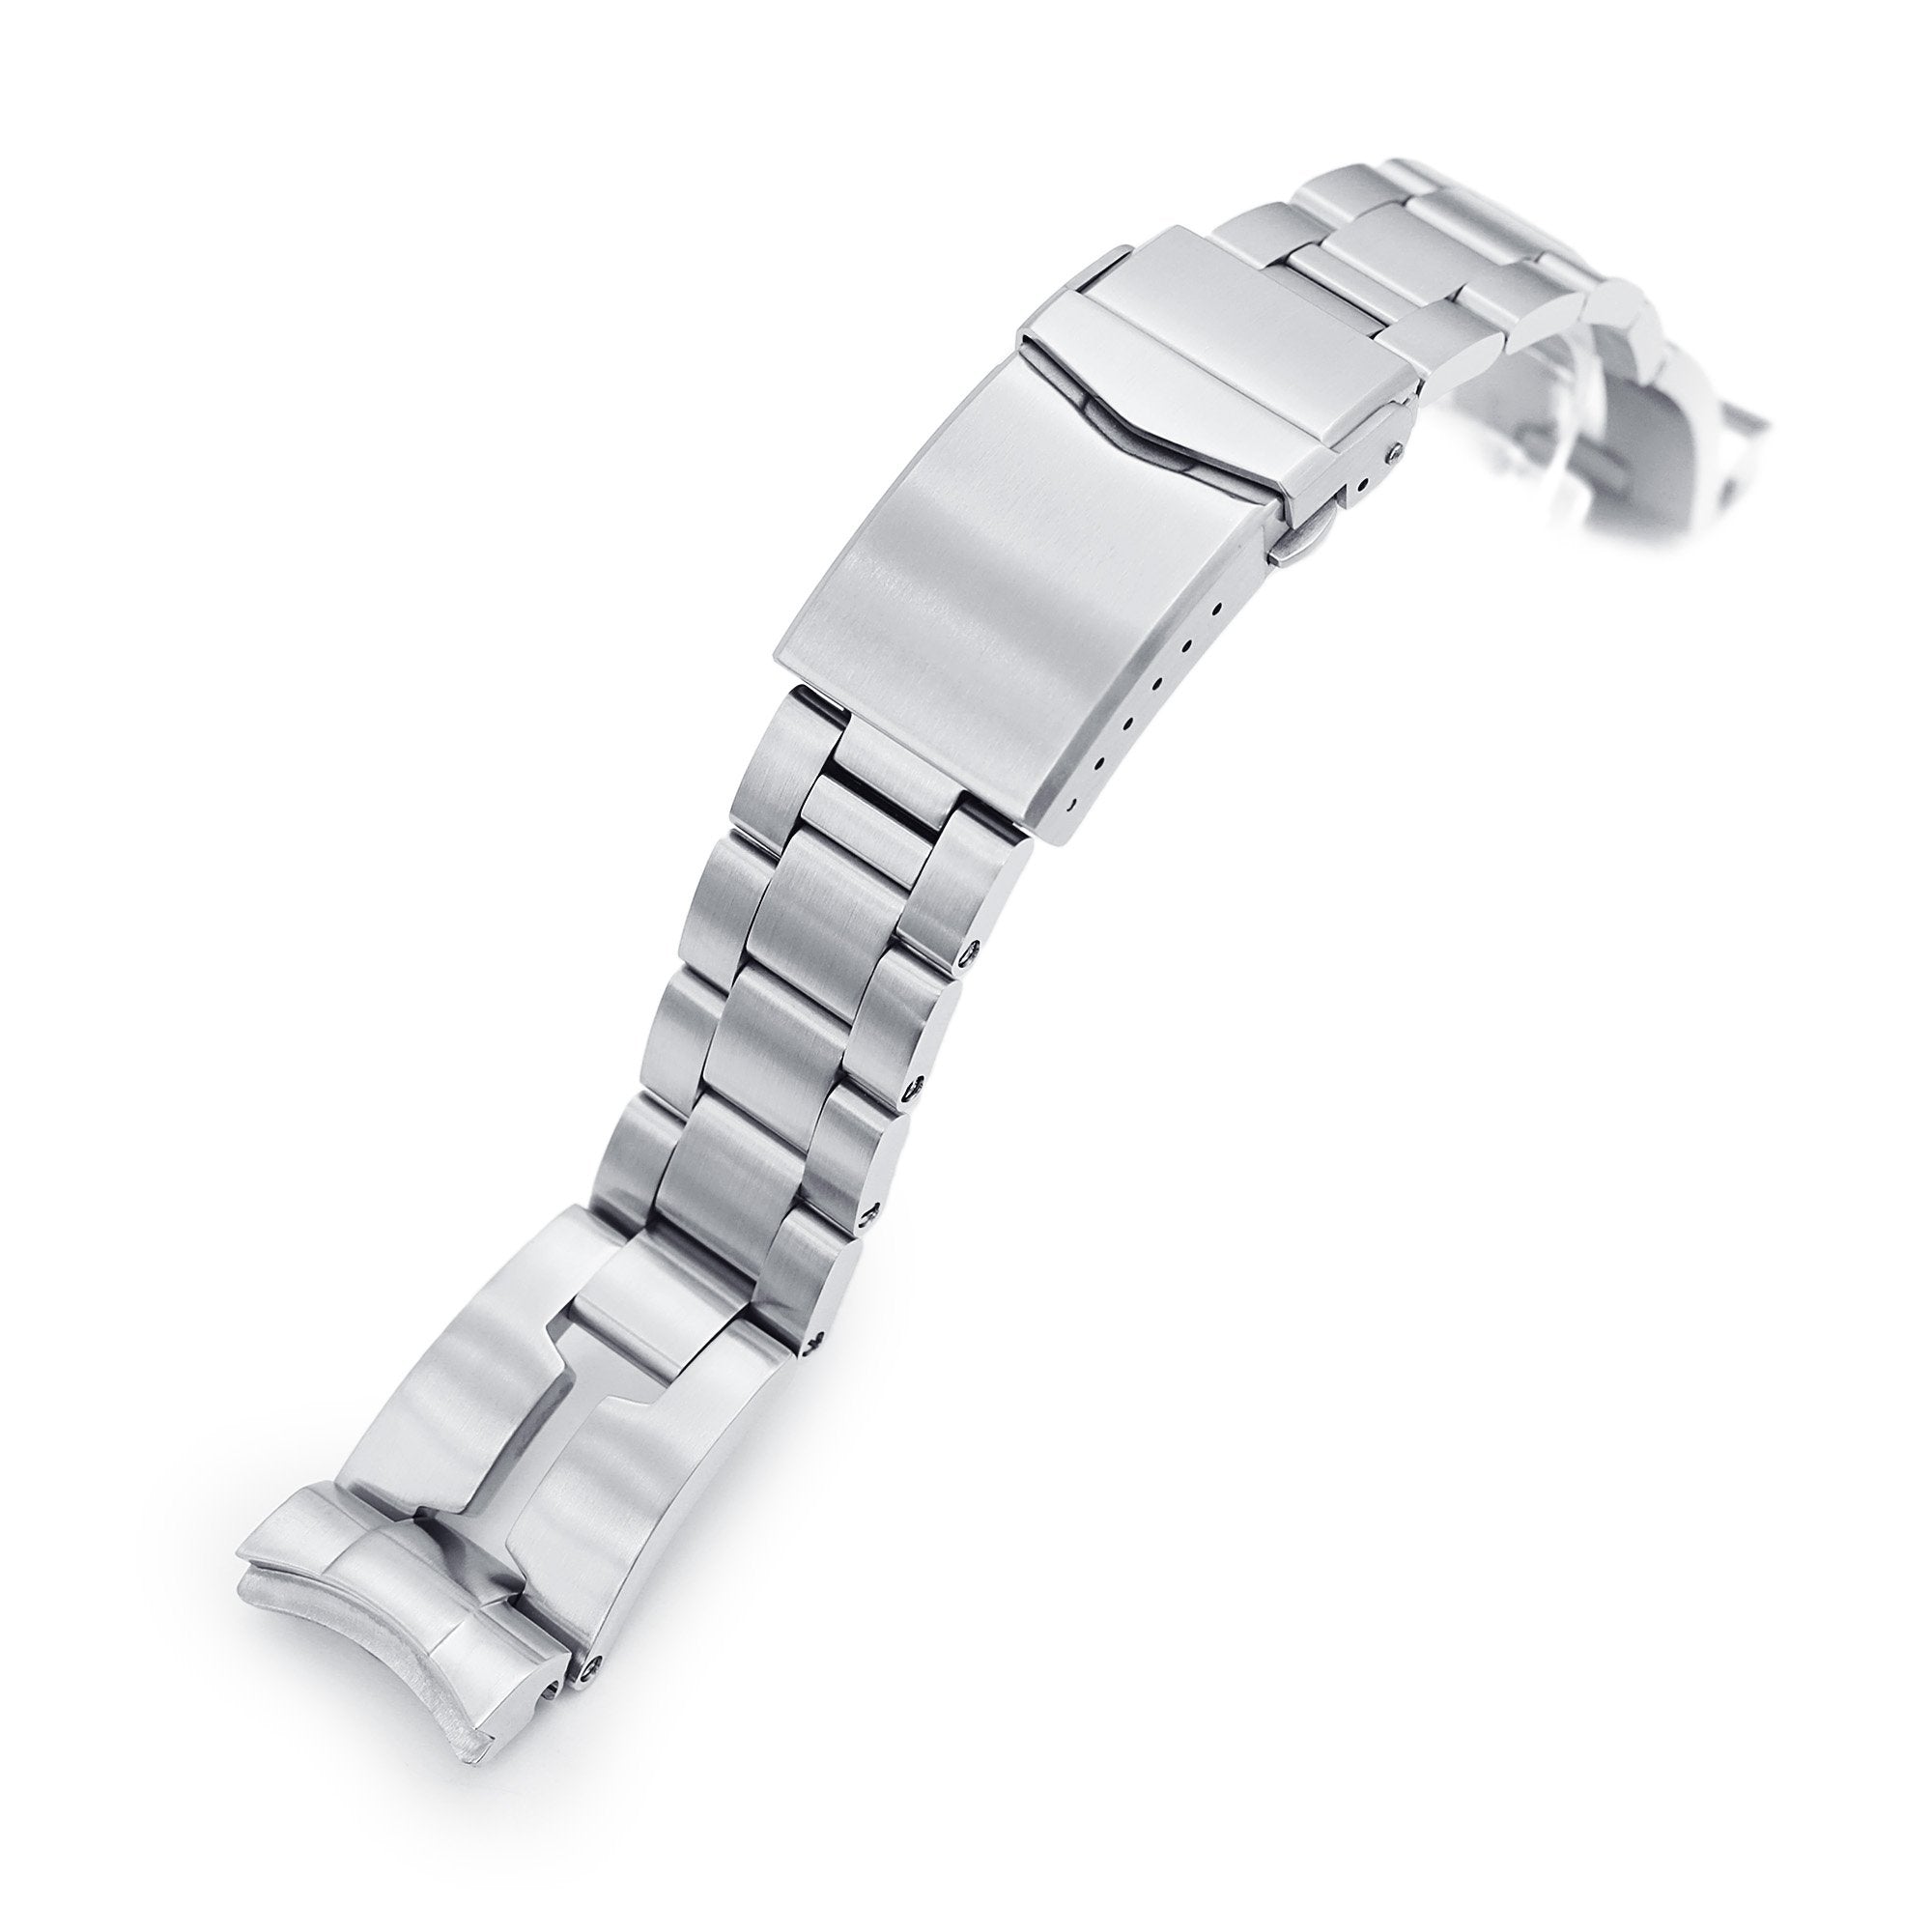 20mm Retro Razor 316L Stainless Steel Watch Bracelet for Seiko Baby MM 200 Brushed V-Clasp Strapcode Watch Bands